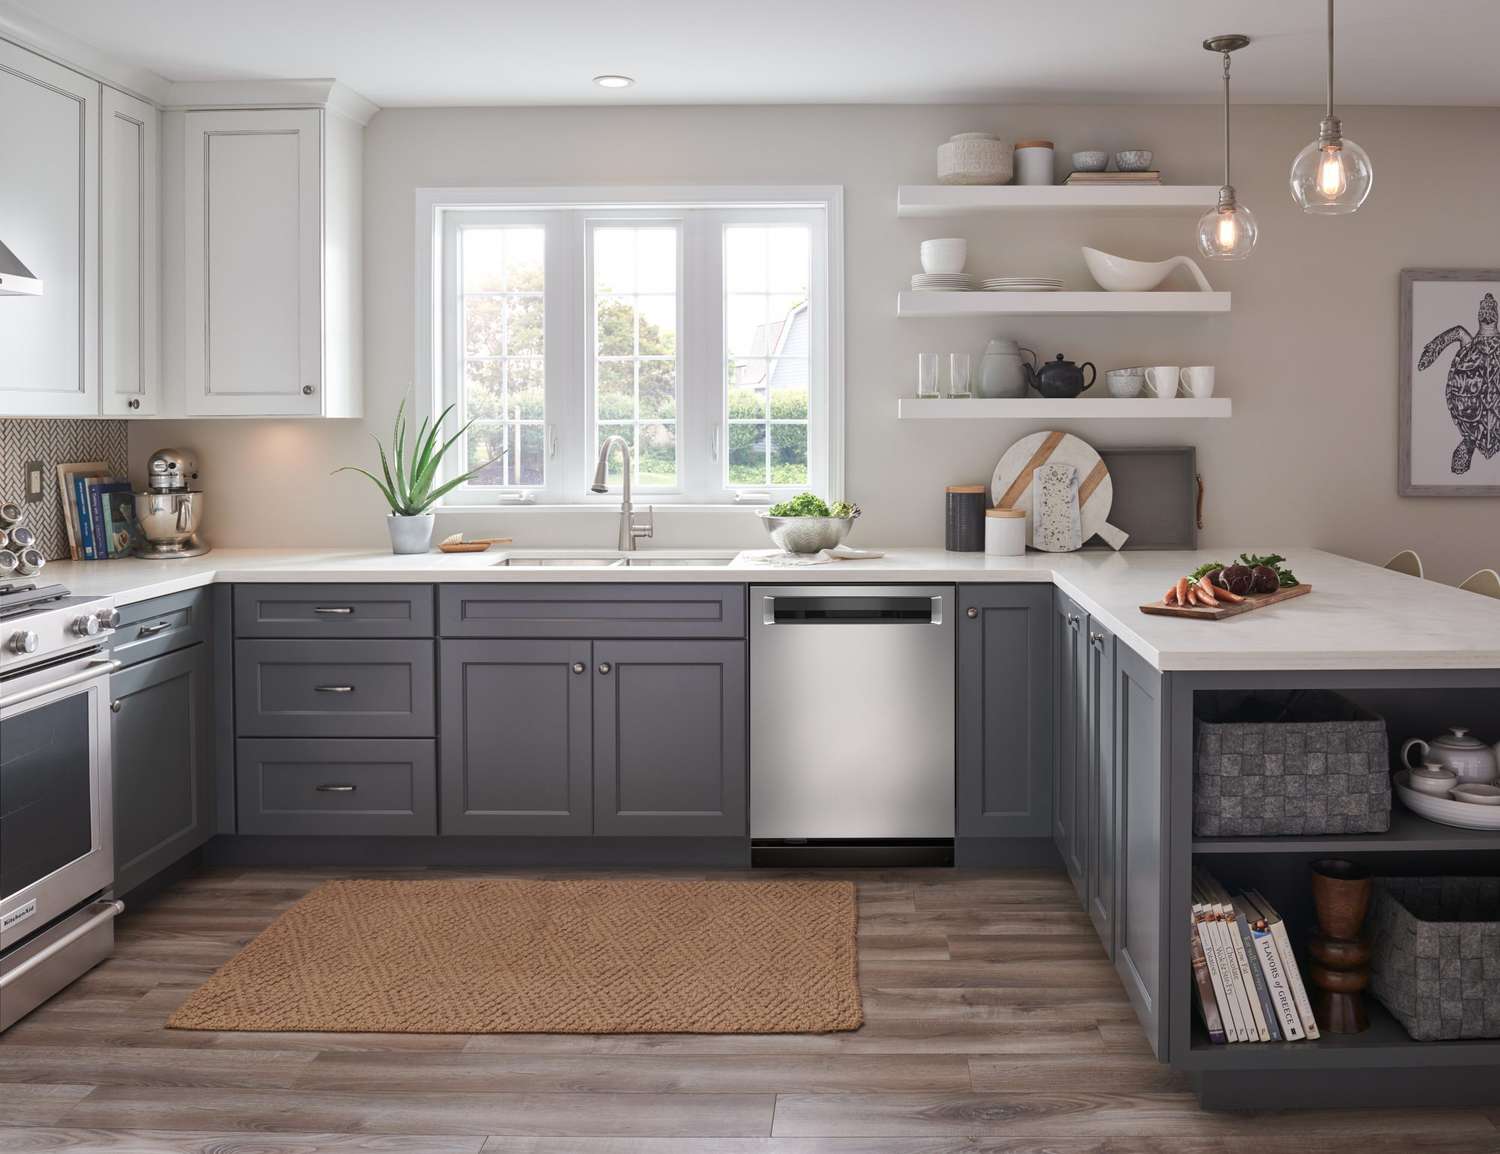 Is Your Kitchen Truly the Heart of Your Home? Explore Renovation Possibilities